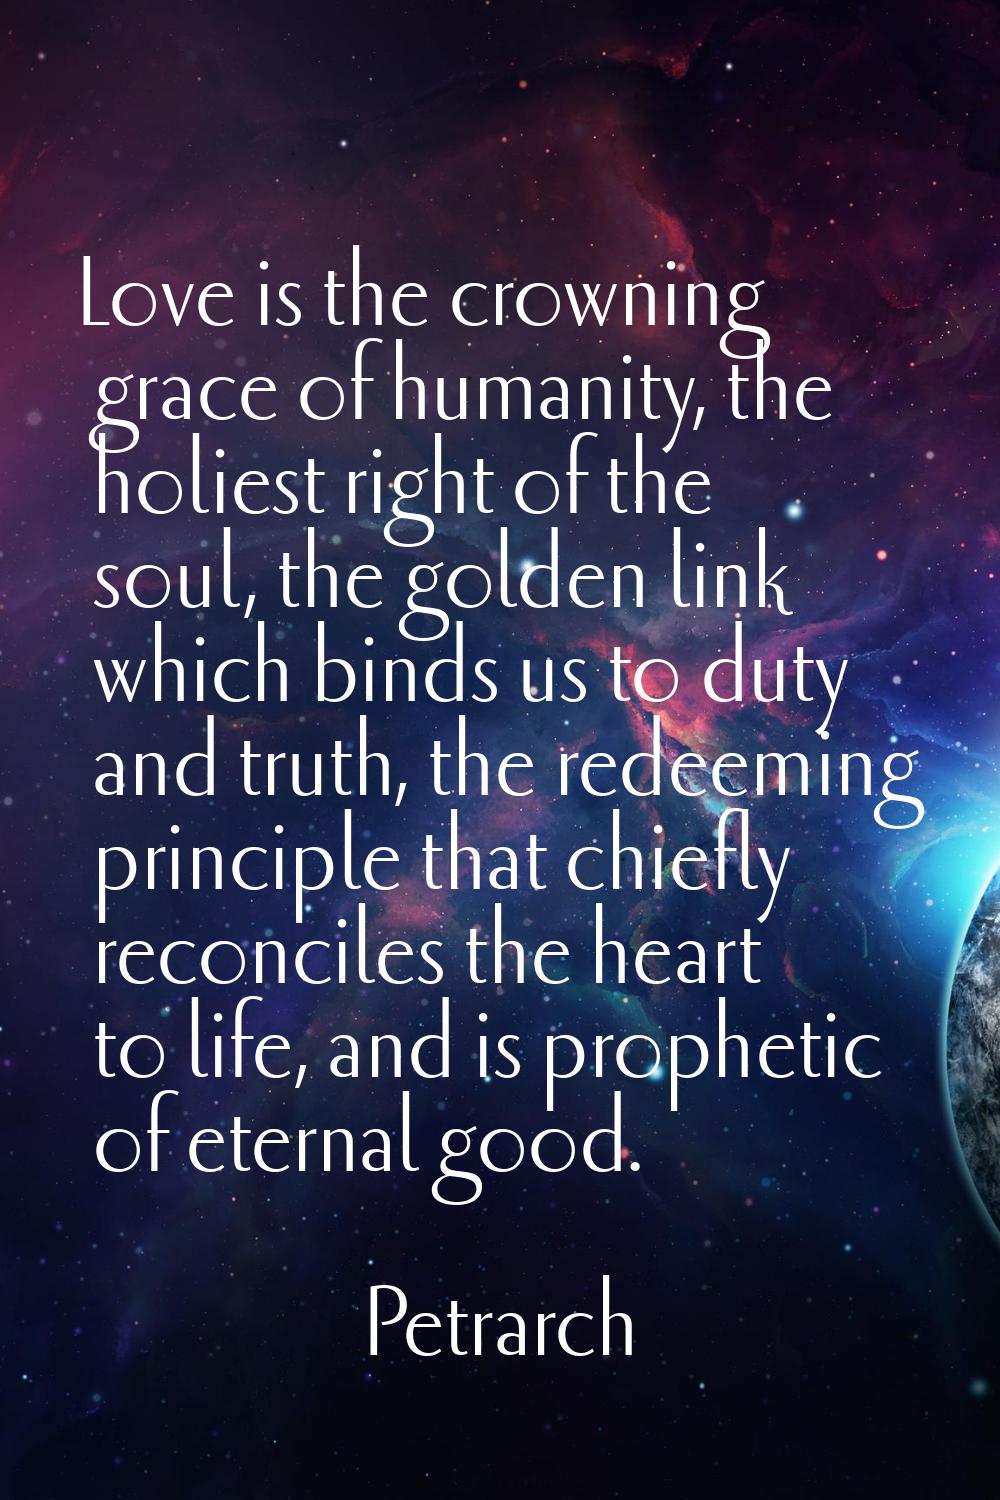 Love is the crowning grace of humanity, the holiest right of the soul, the golden link which binds 